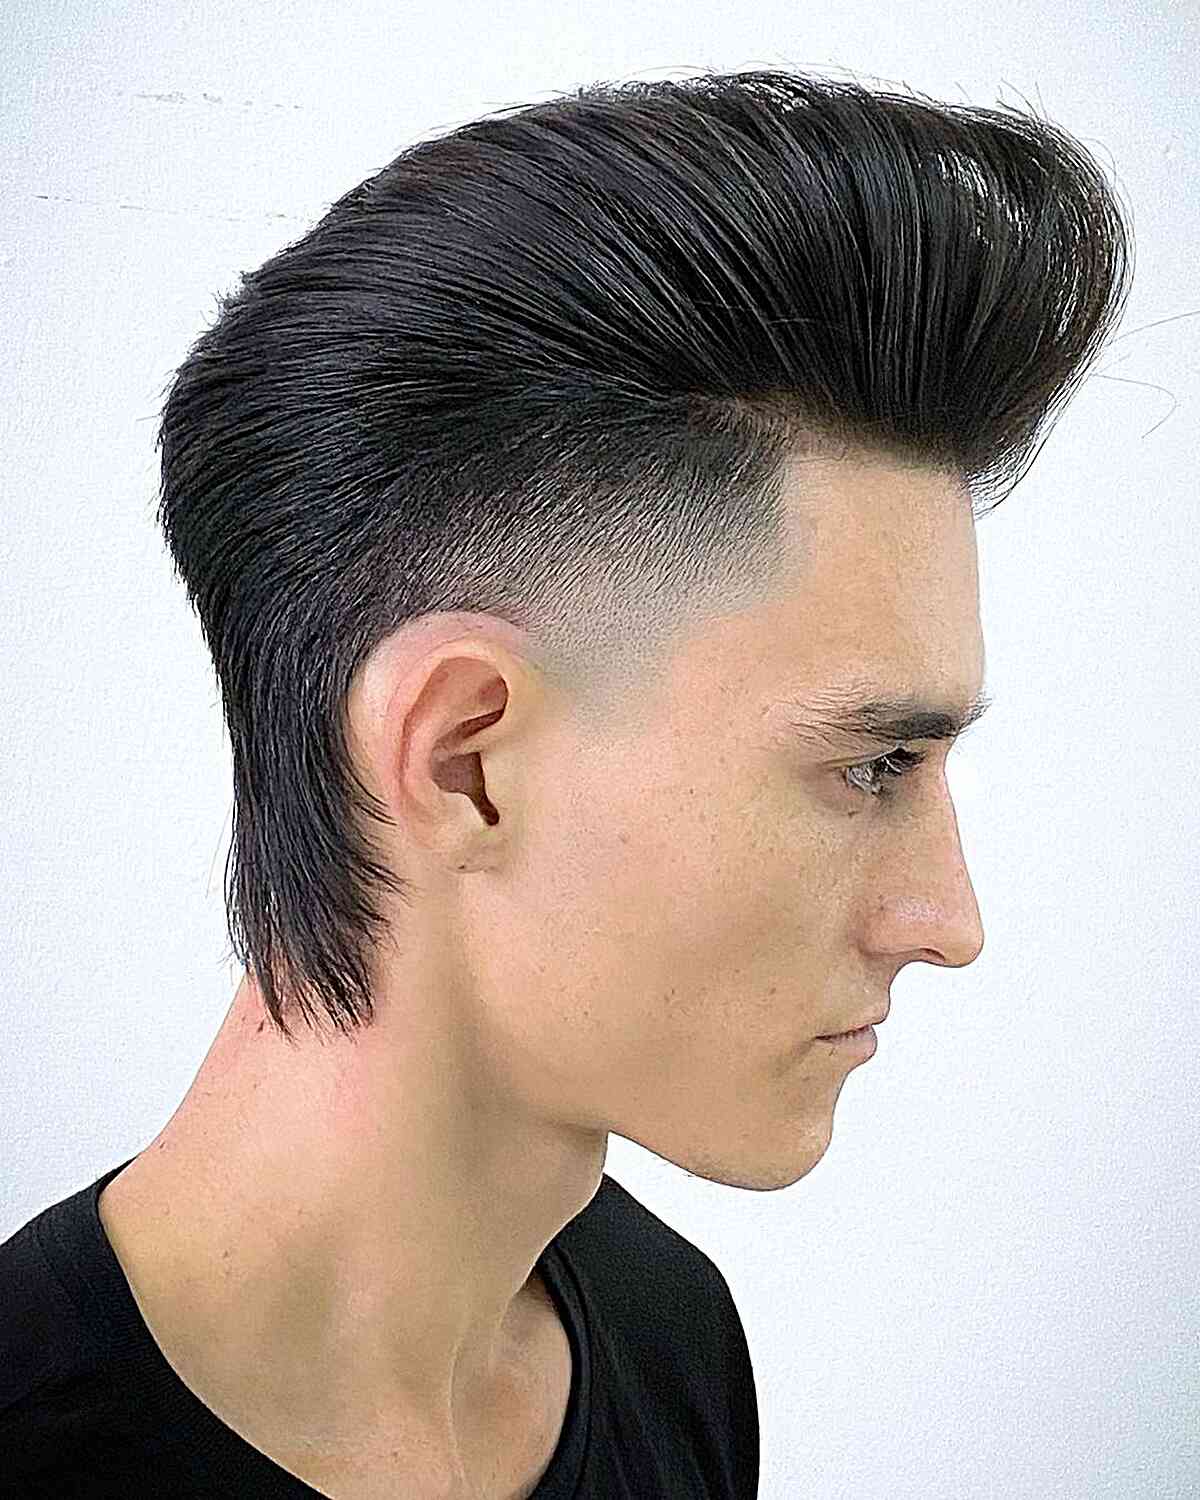 Straight Voluminous Pomp with Shaved Temple and Longer Hair at Nape Area